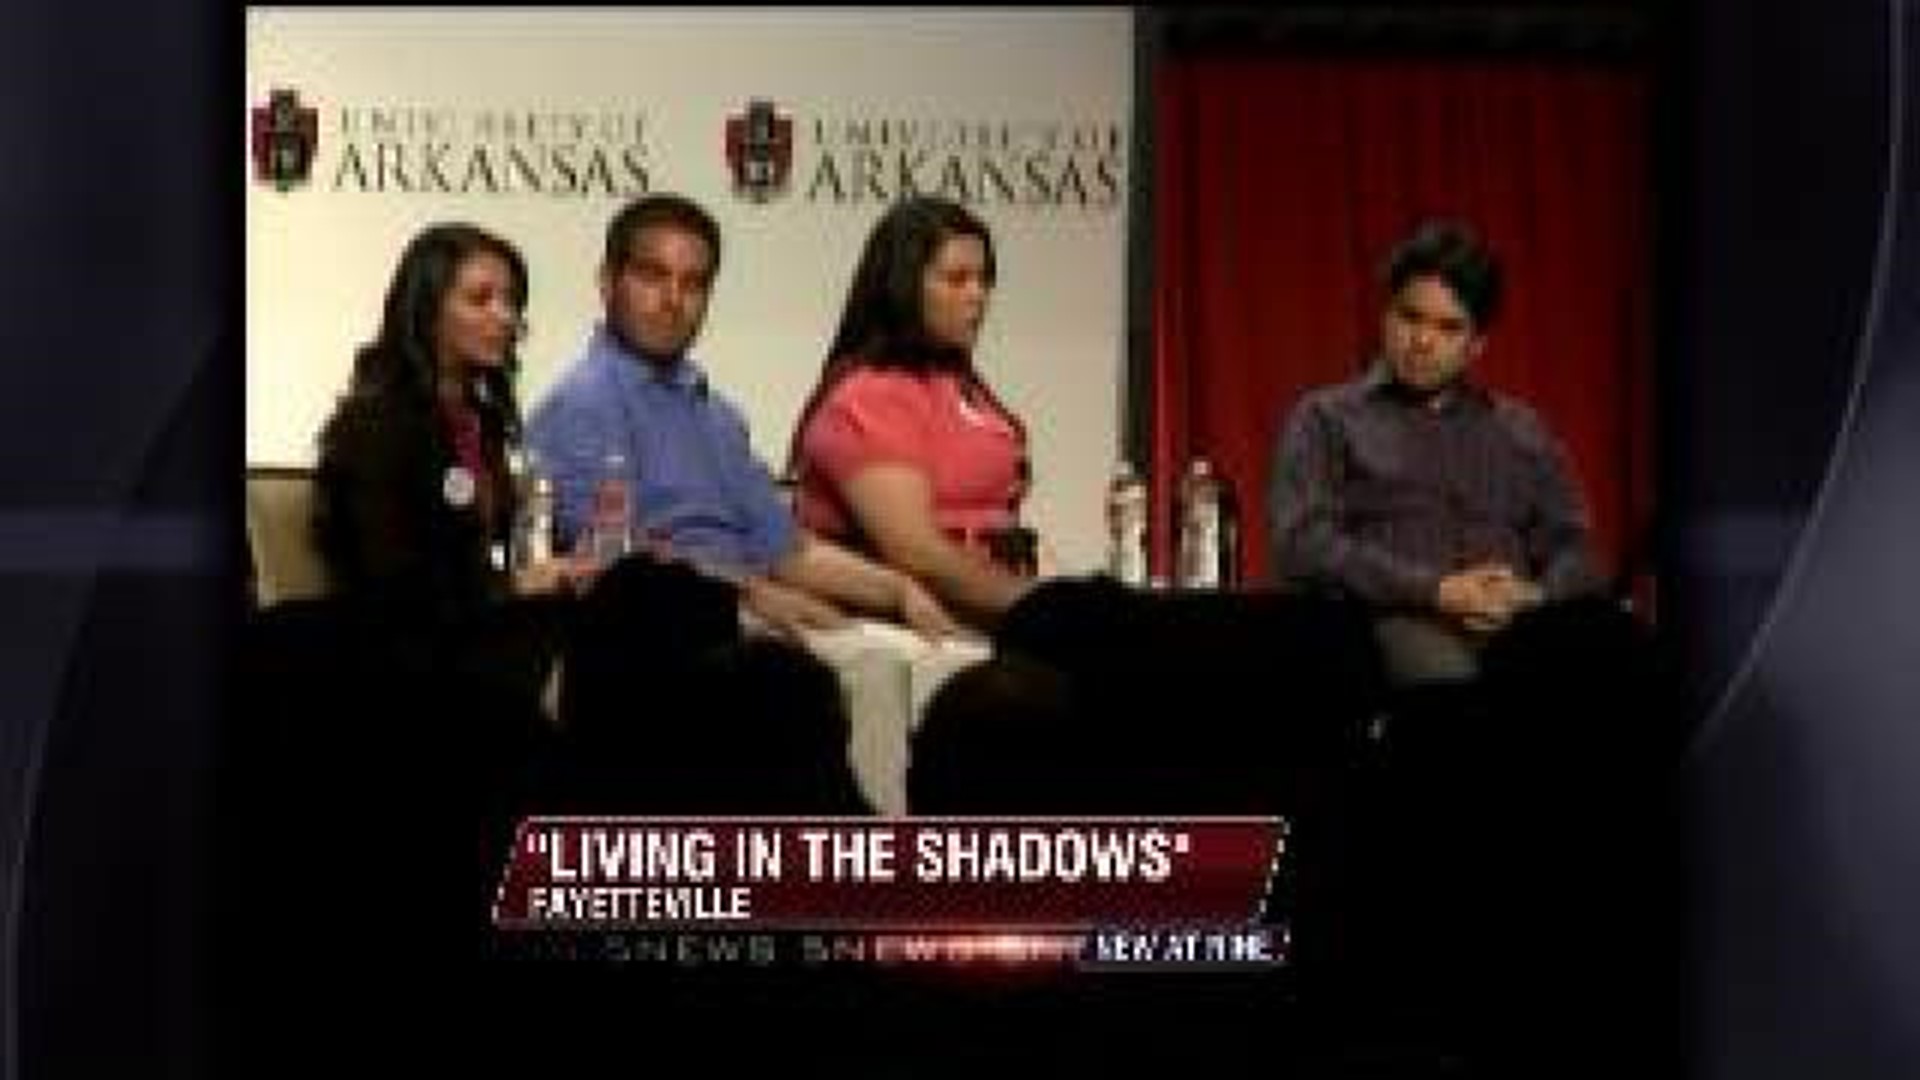 Undocumented: Living in the Shadows